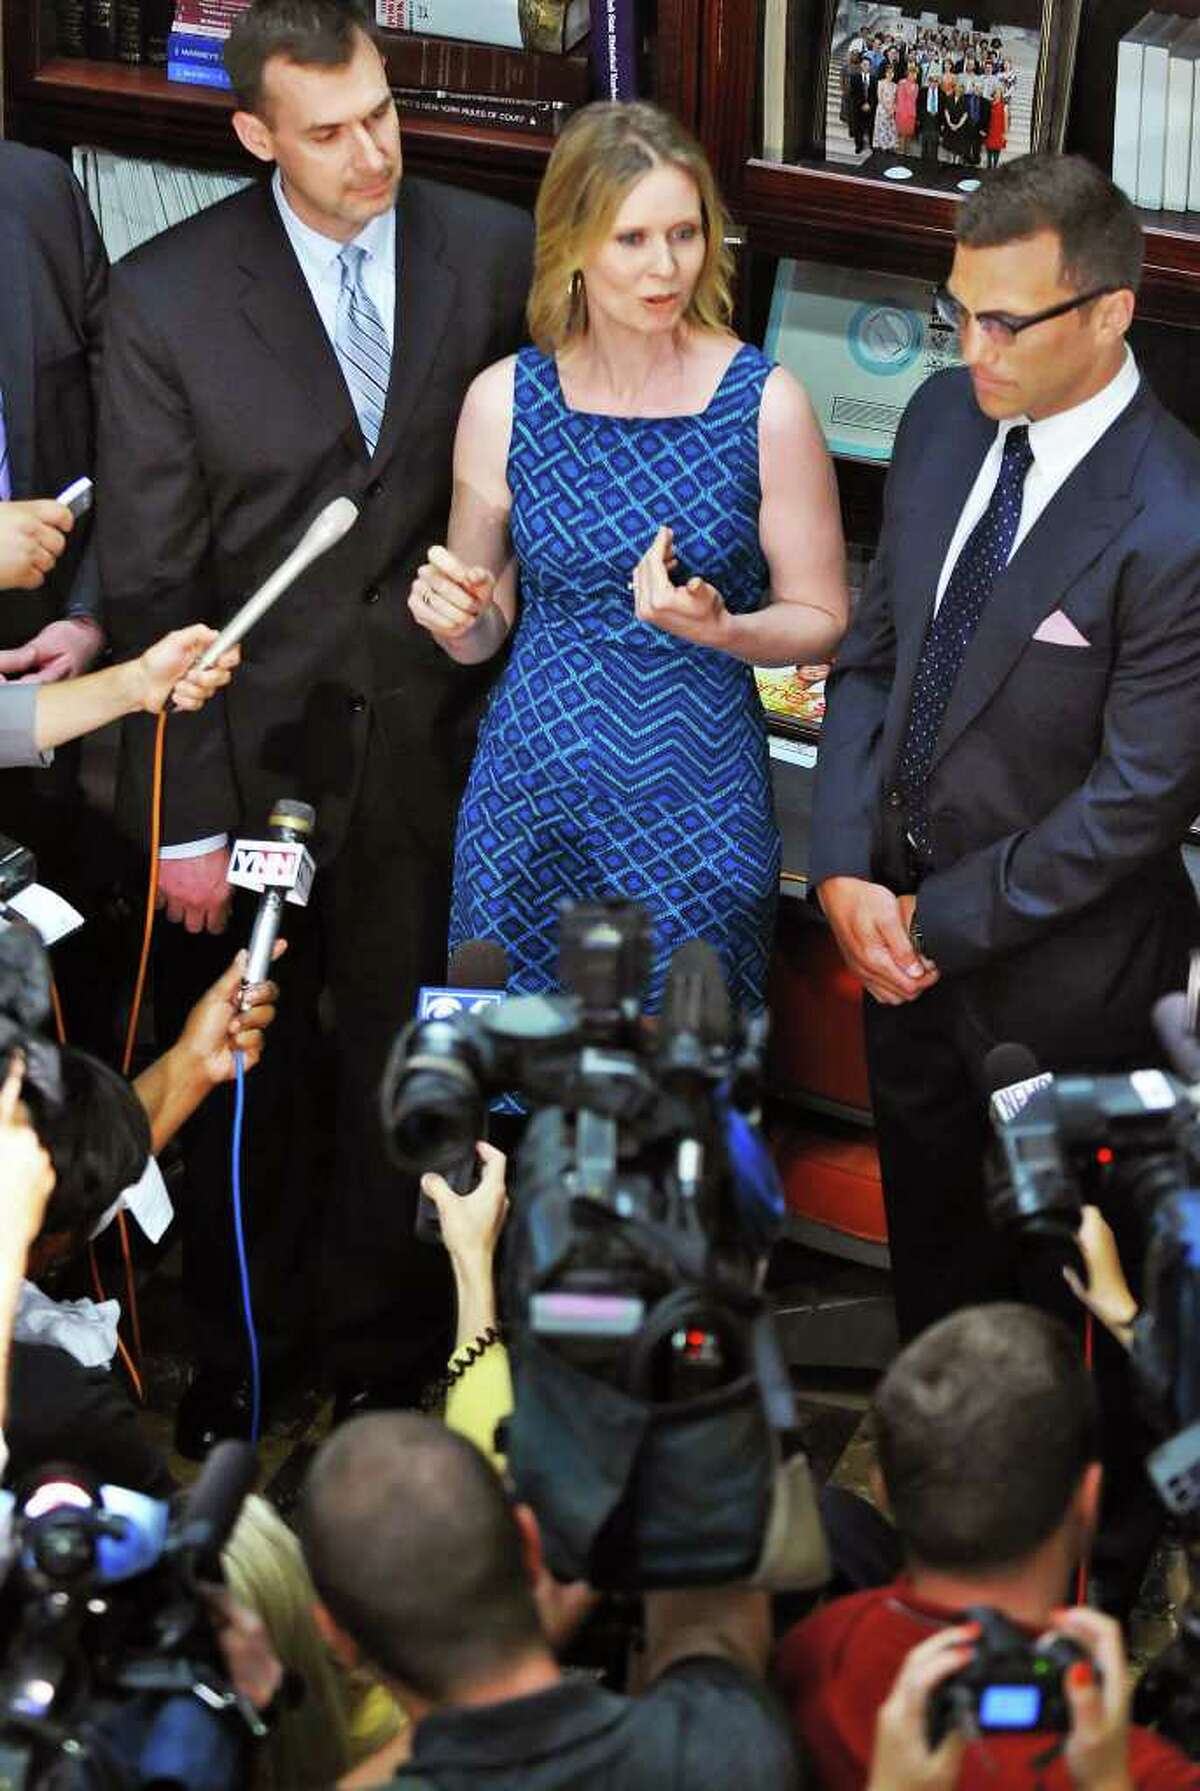 Gay rights activist Ross Levi, left, ?Sex and The City? star Cynthia Nixon and New York Rangers player Sean Avery, at right, during a news conference calling on the state legislature to legalize same-sex marriage at the Capitol Tuesday June 14, 2011. (John Carl D'Annibale / Times Union)